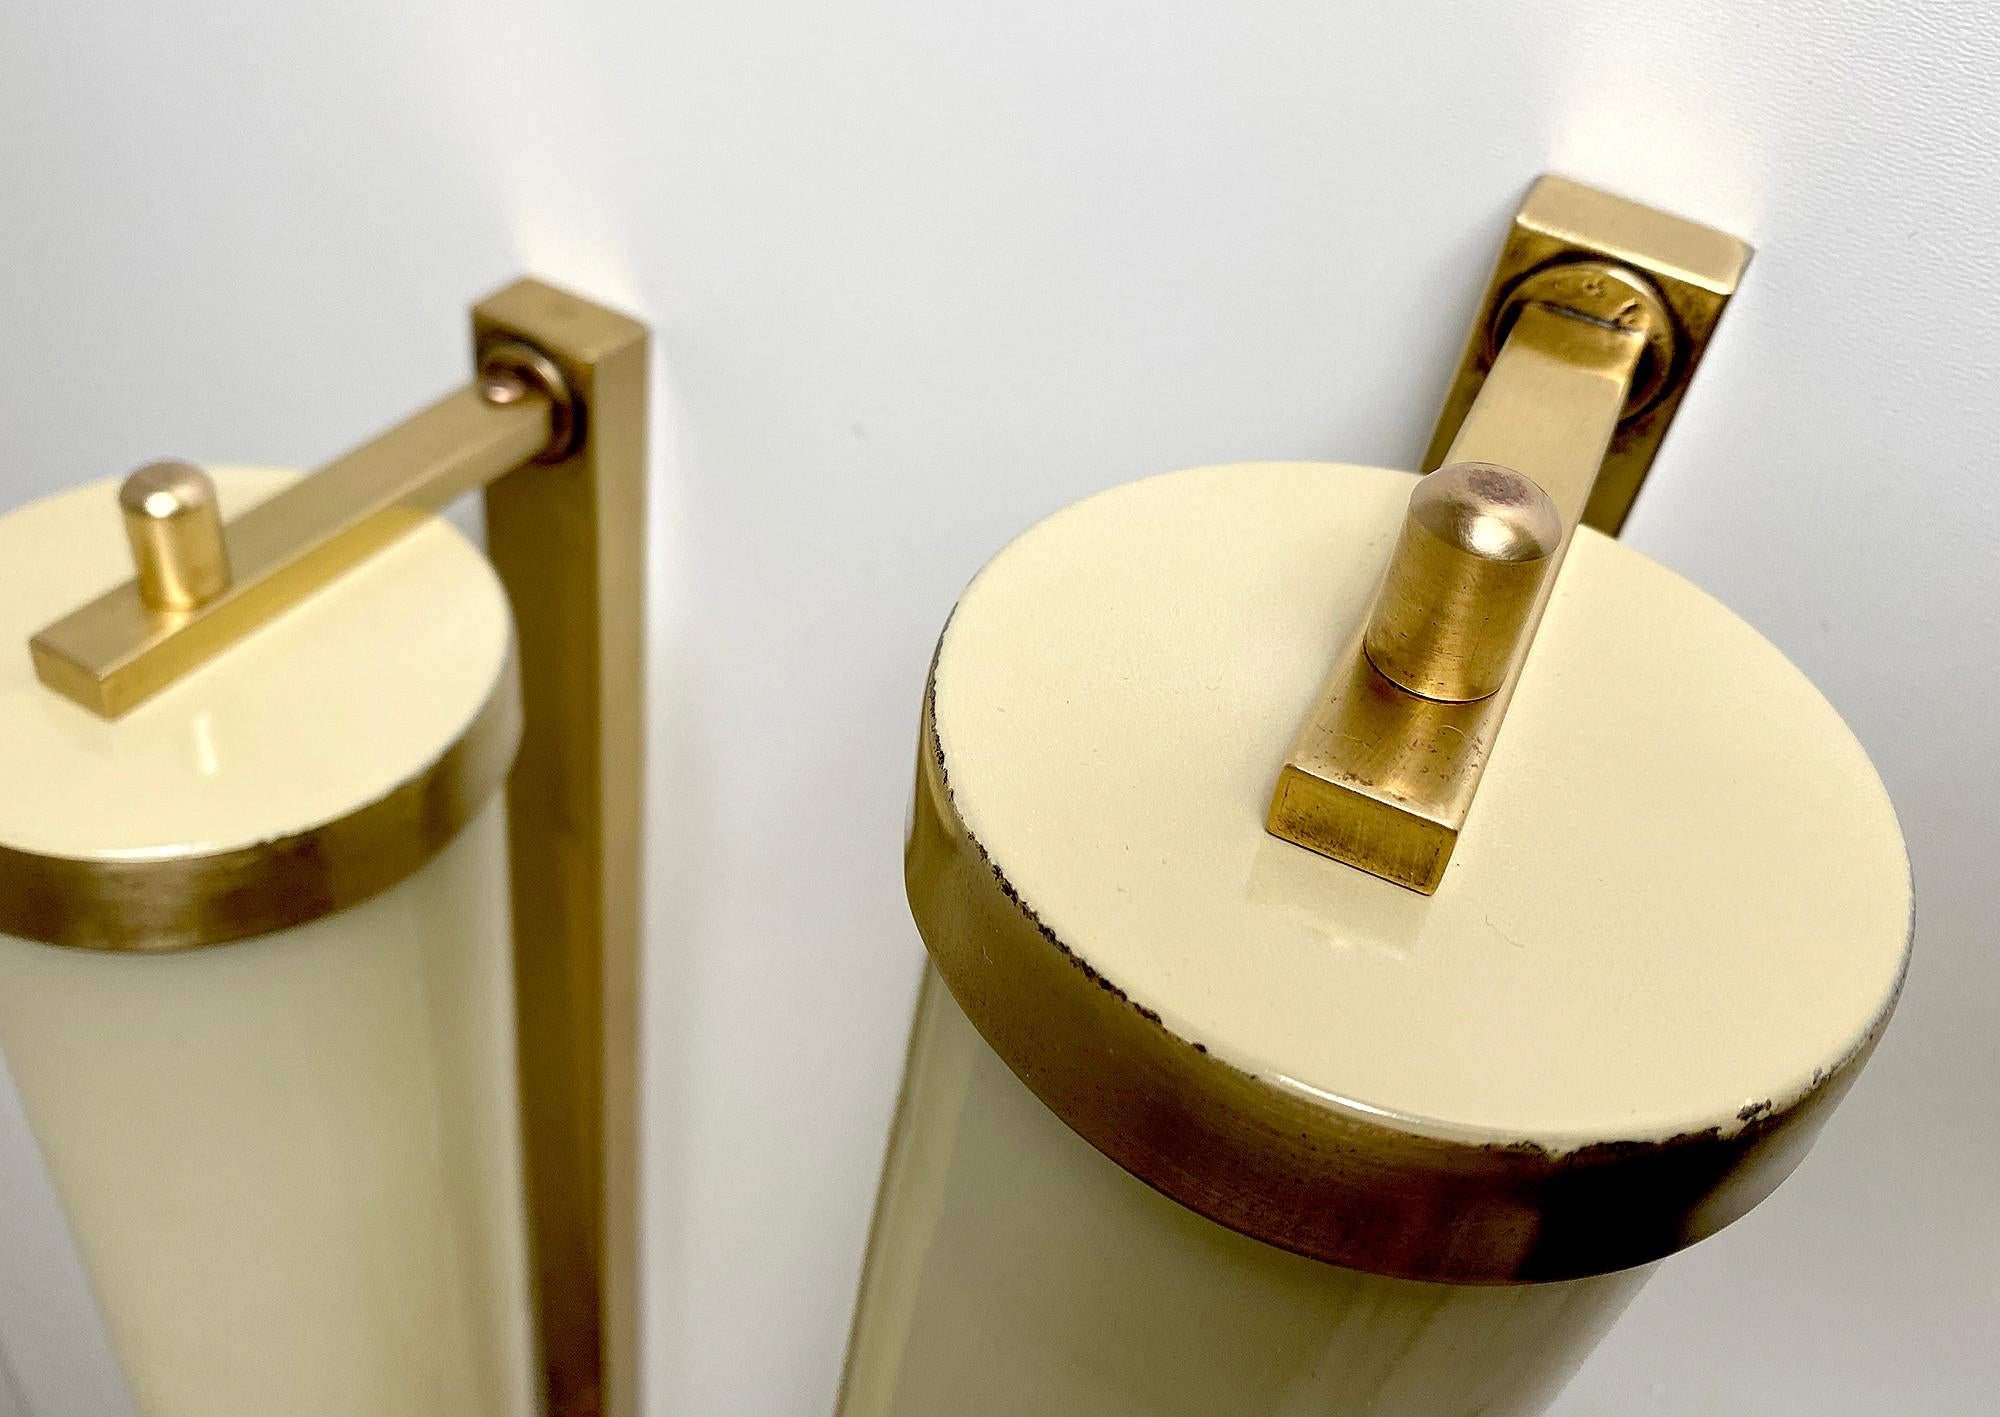 Pair of Large 1930s Art Deco Bauhaus Sconces, Brass and Glass For Sale 11